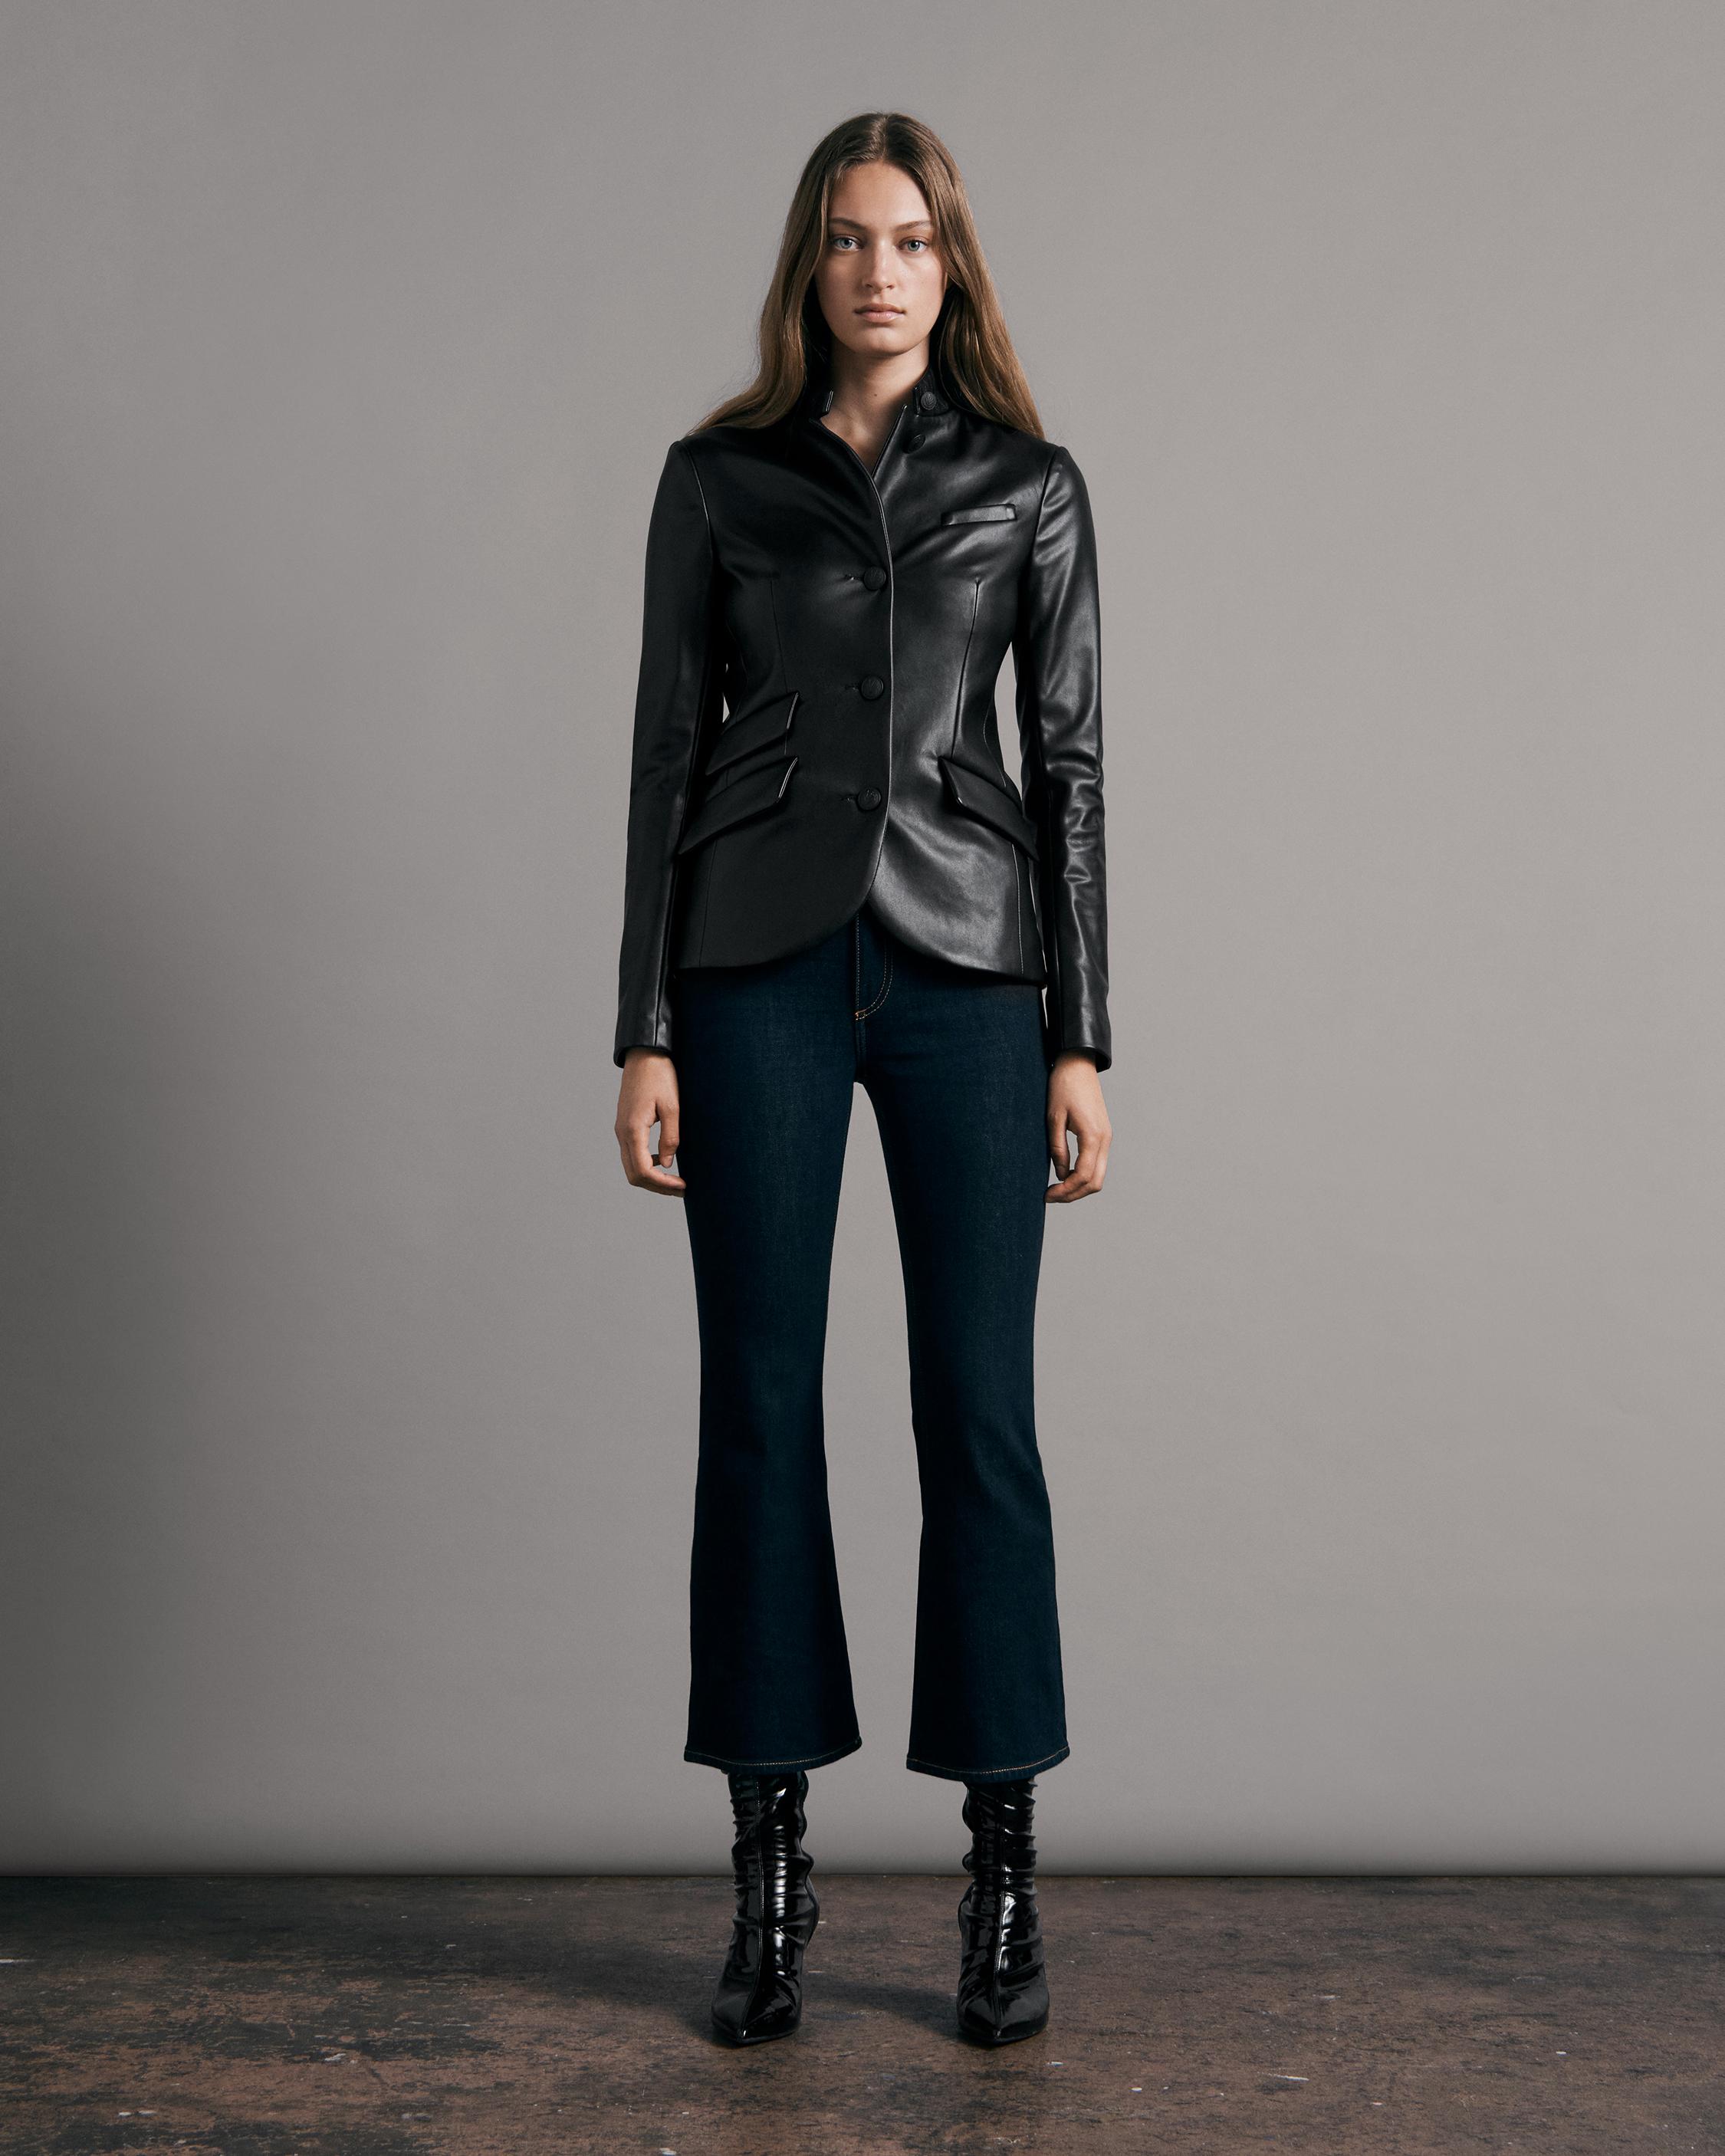 Rag & Bone Fall 2022 Ready-to-Wear Collection